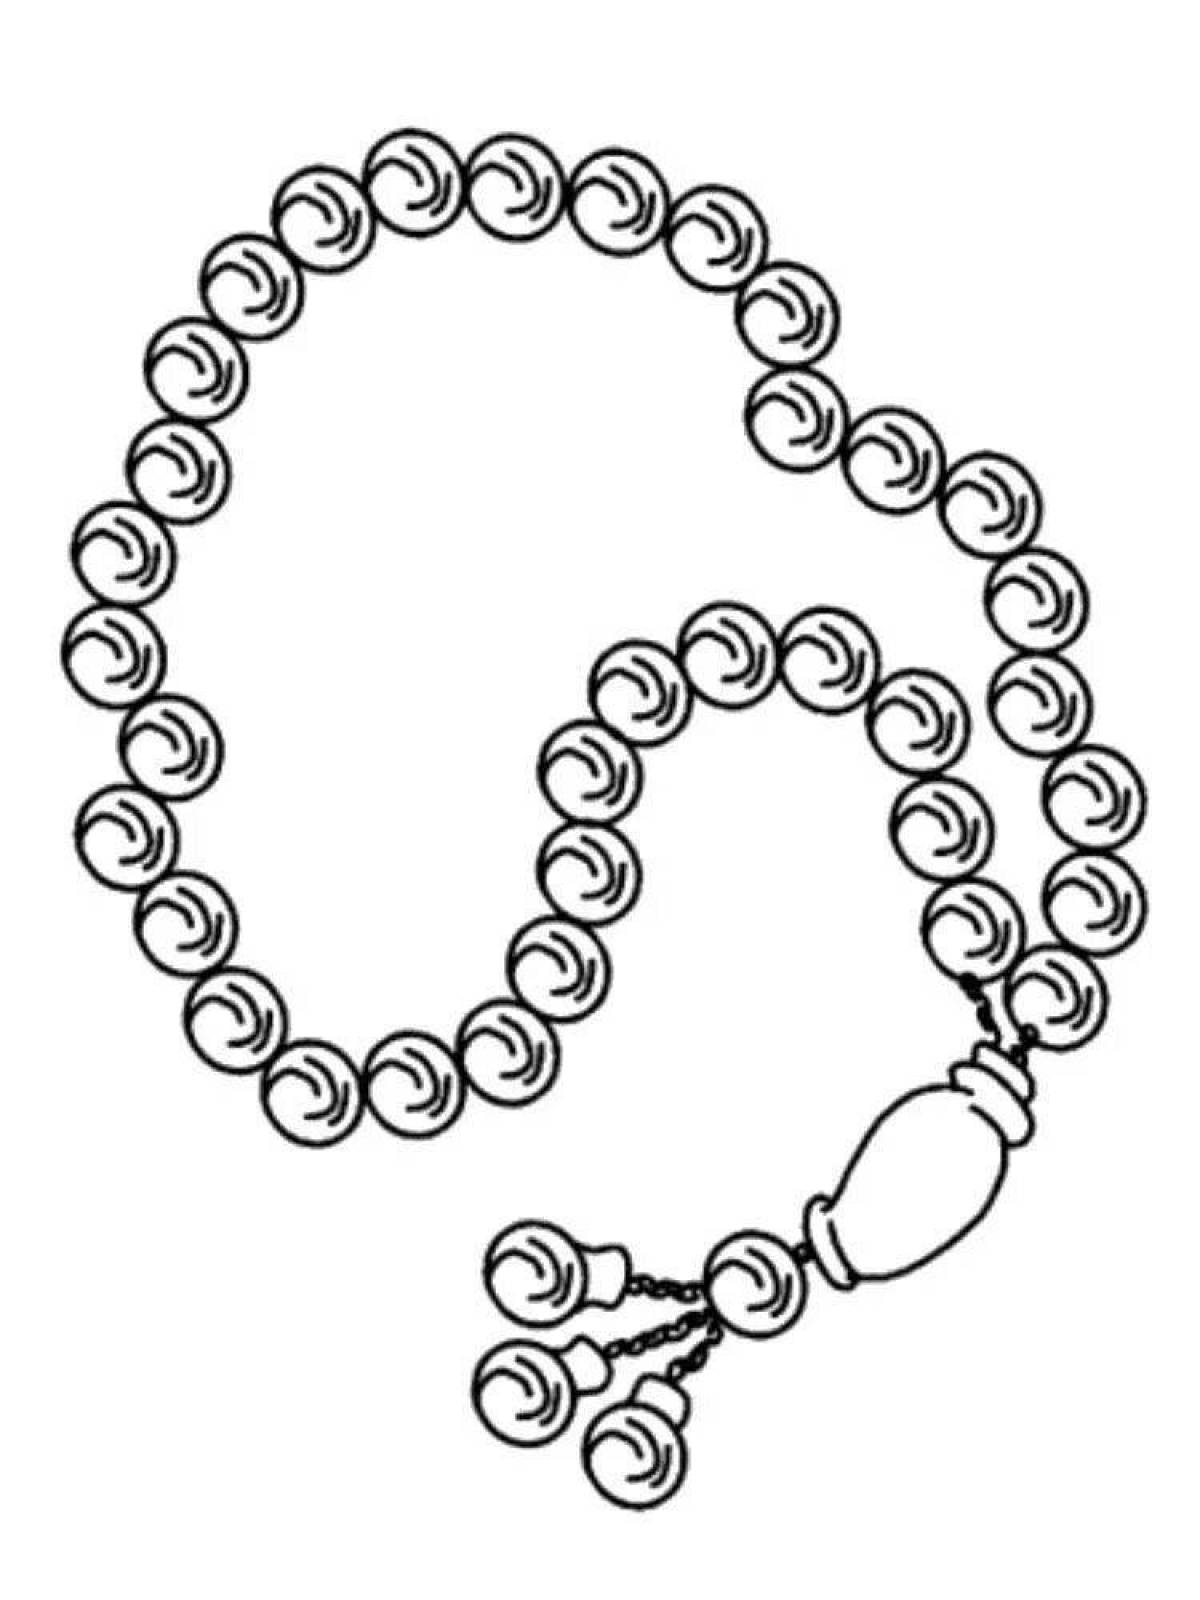 Intricate necklace coloring page